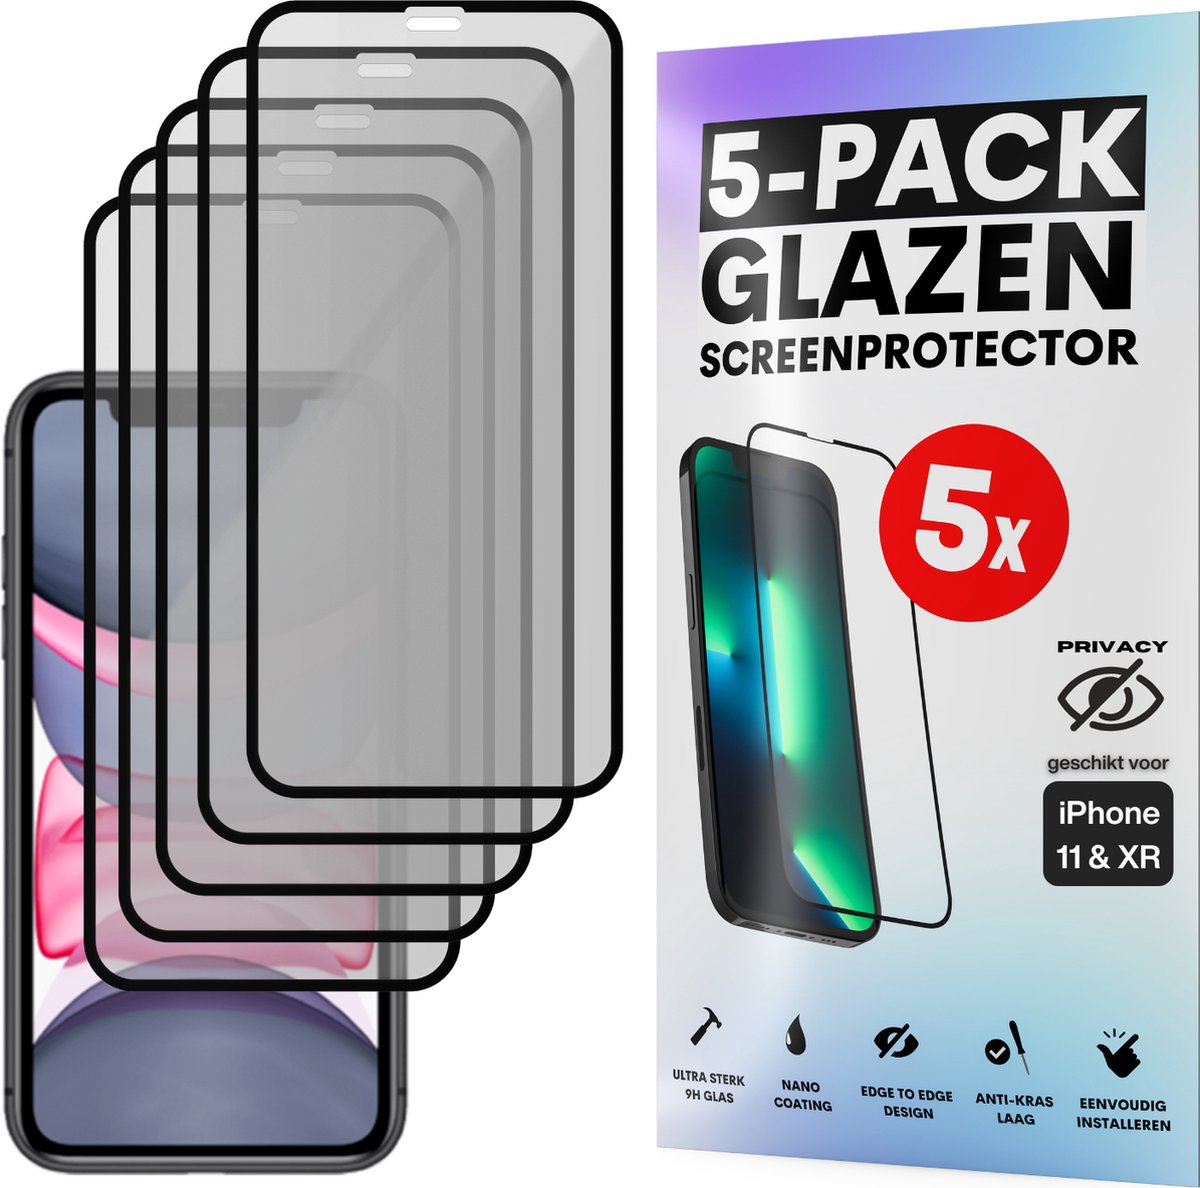 Privacy Screenprotector - Geschikt voor iPhone 11 / XR - Gehard Glas - Full Cover Tempered Privacy Glass - Case Friendly - 5 Pack